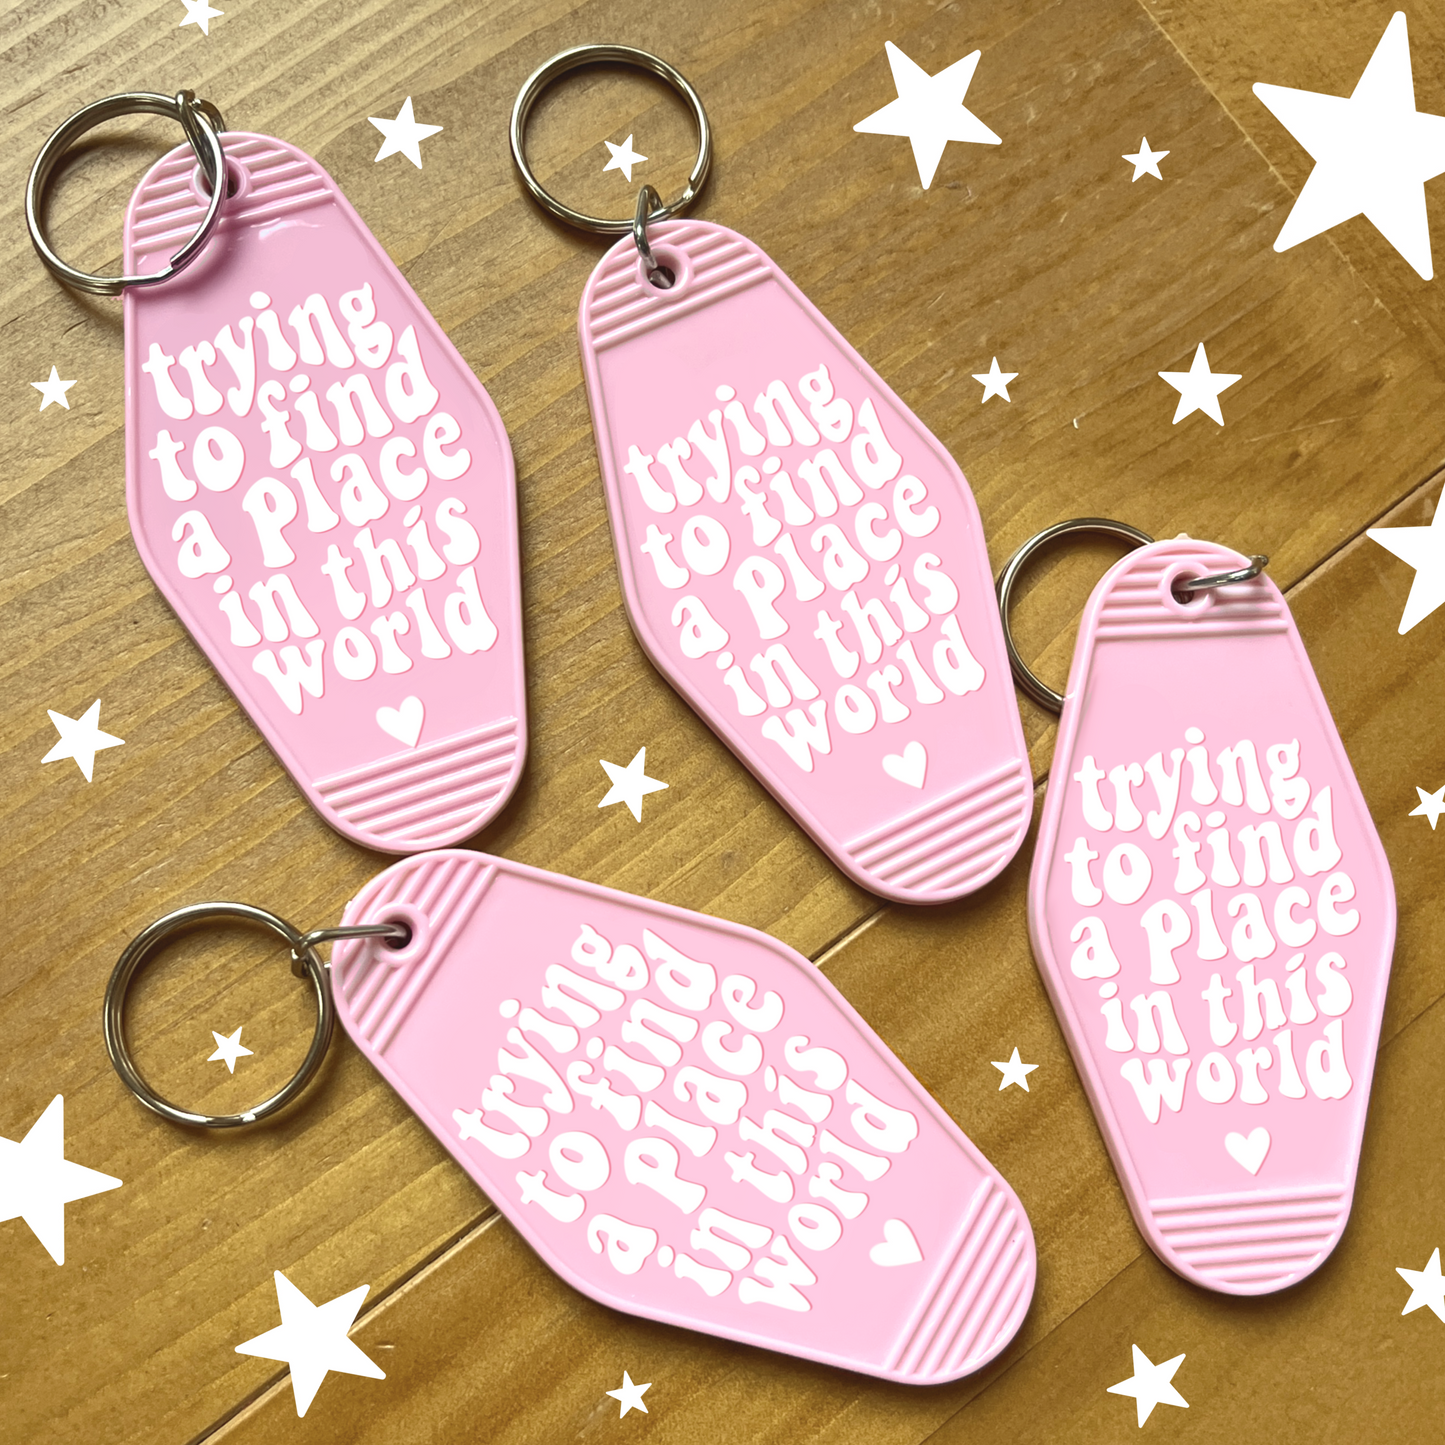 A Place in this World Keyring | Taylor Swift